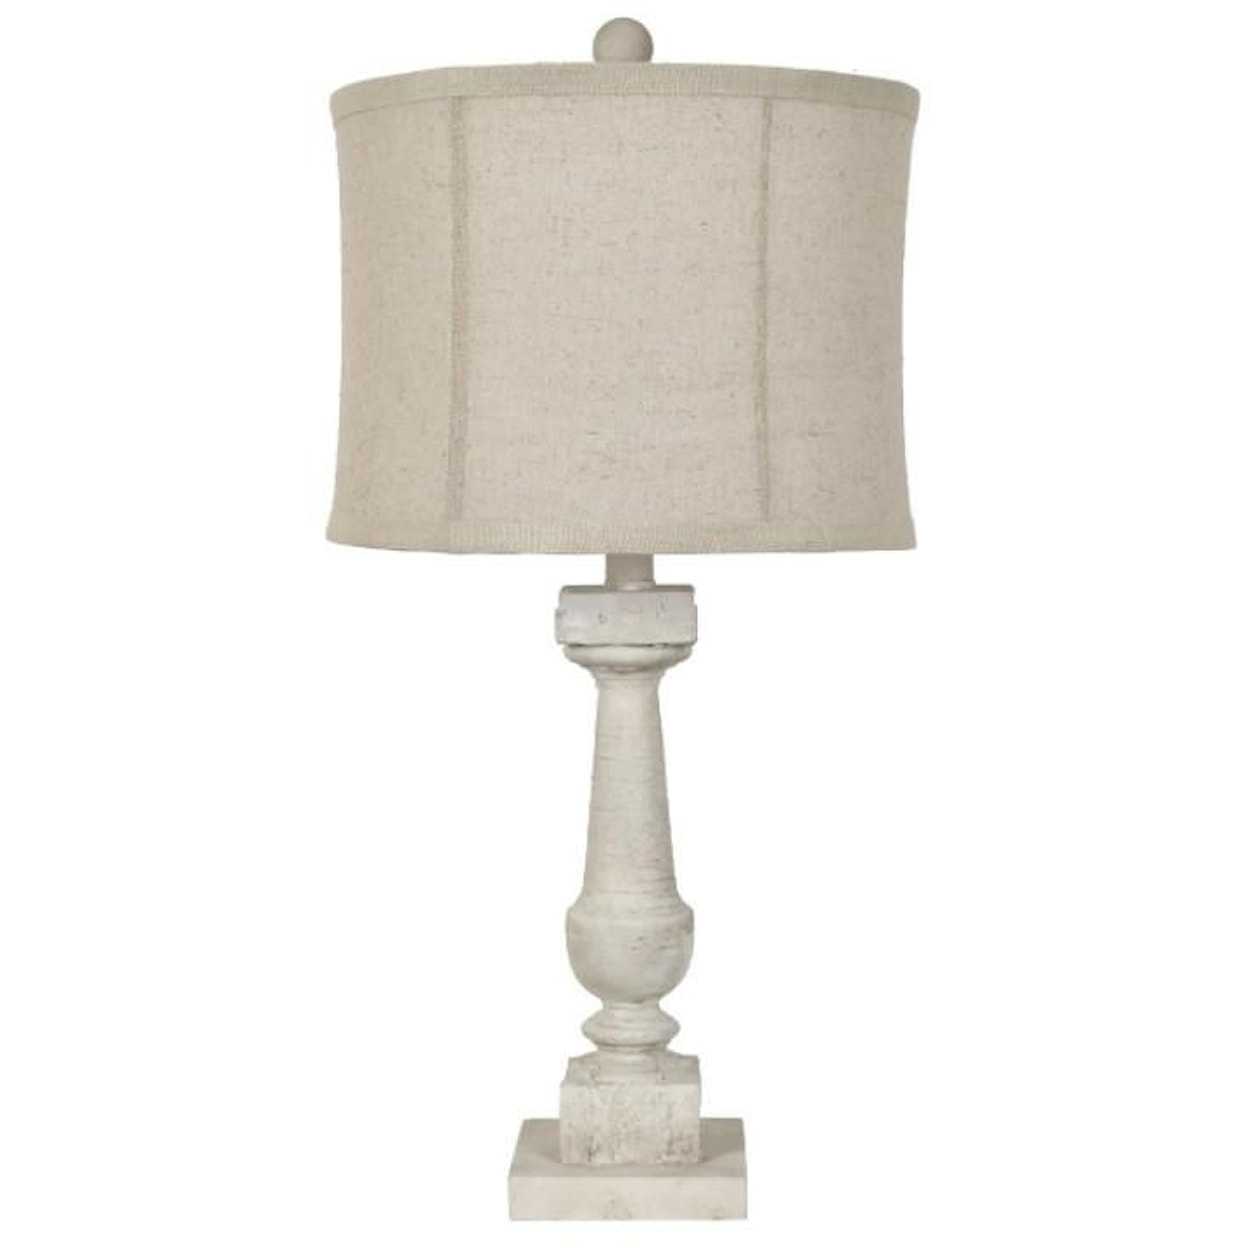 Crestview Collection Lighting Pearson Table Lamp